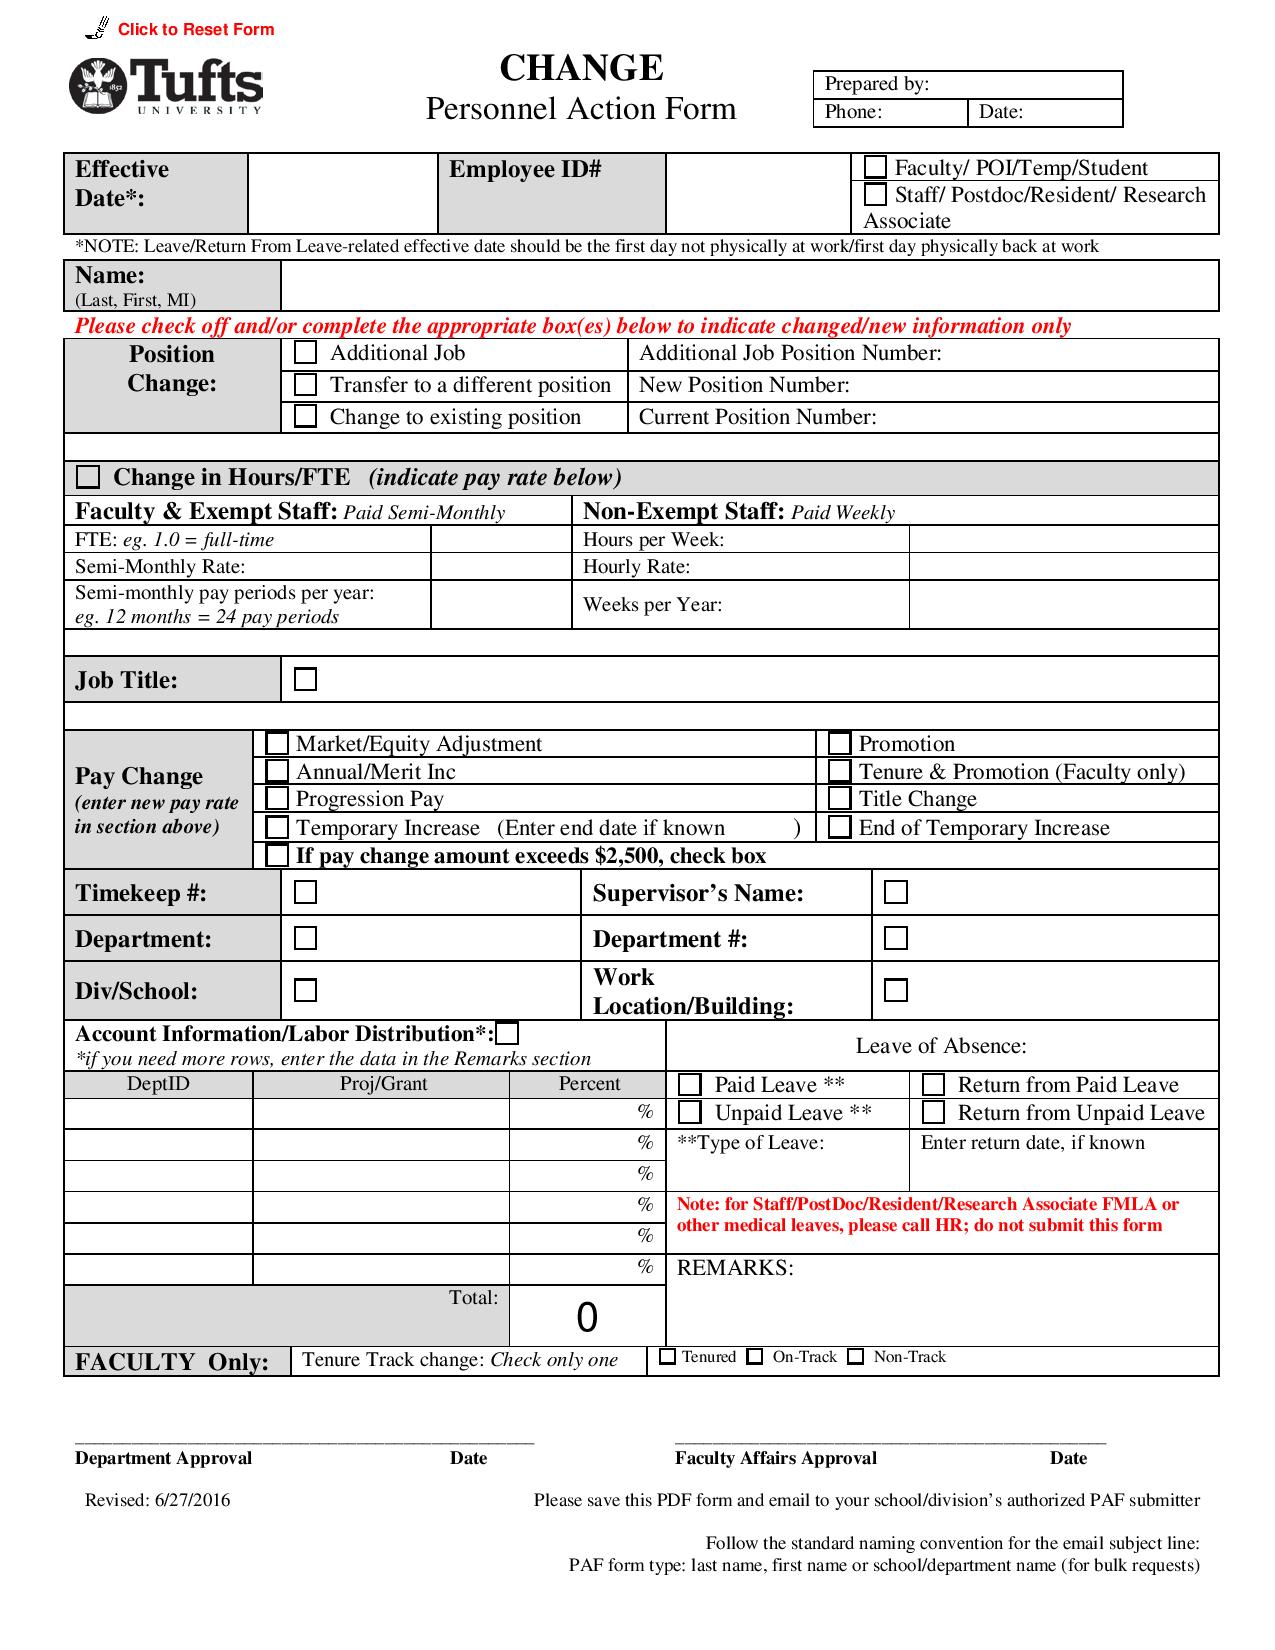 data change personnel action form page 0011